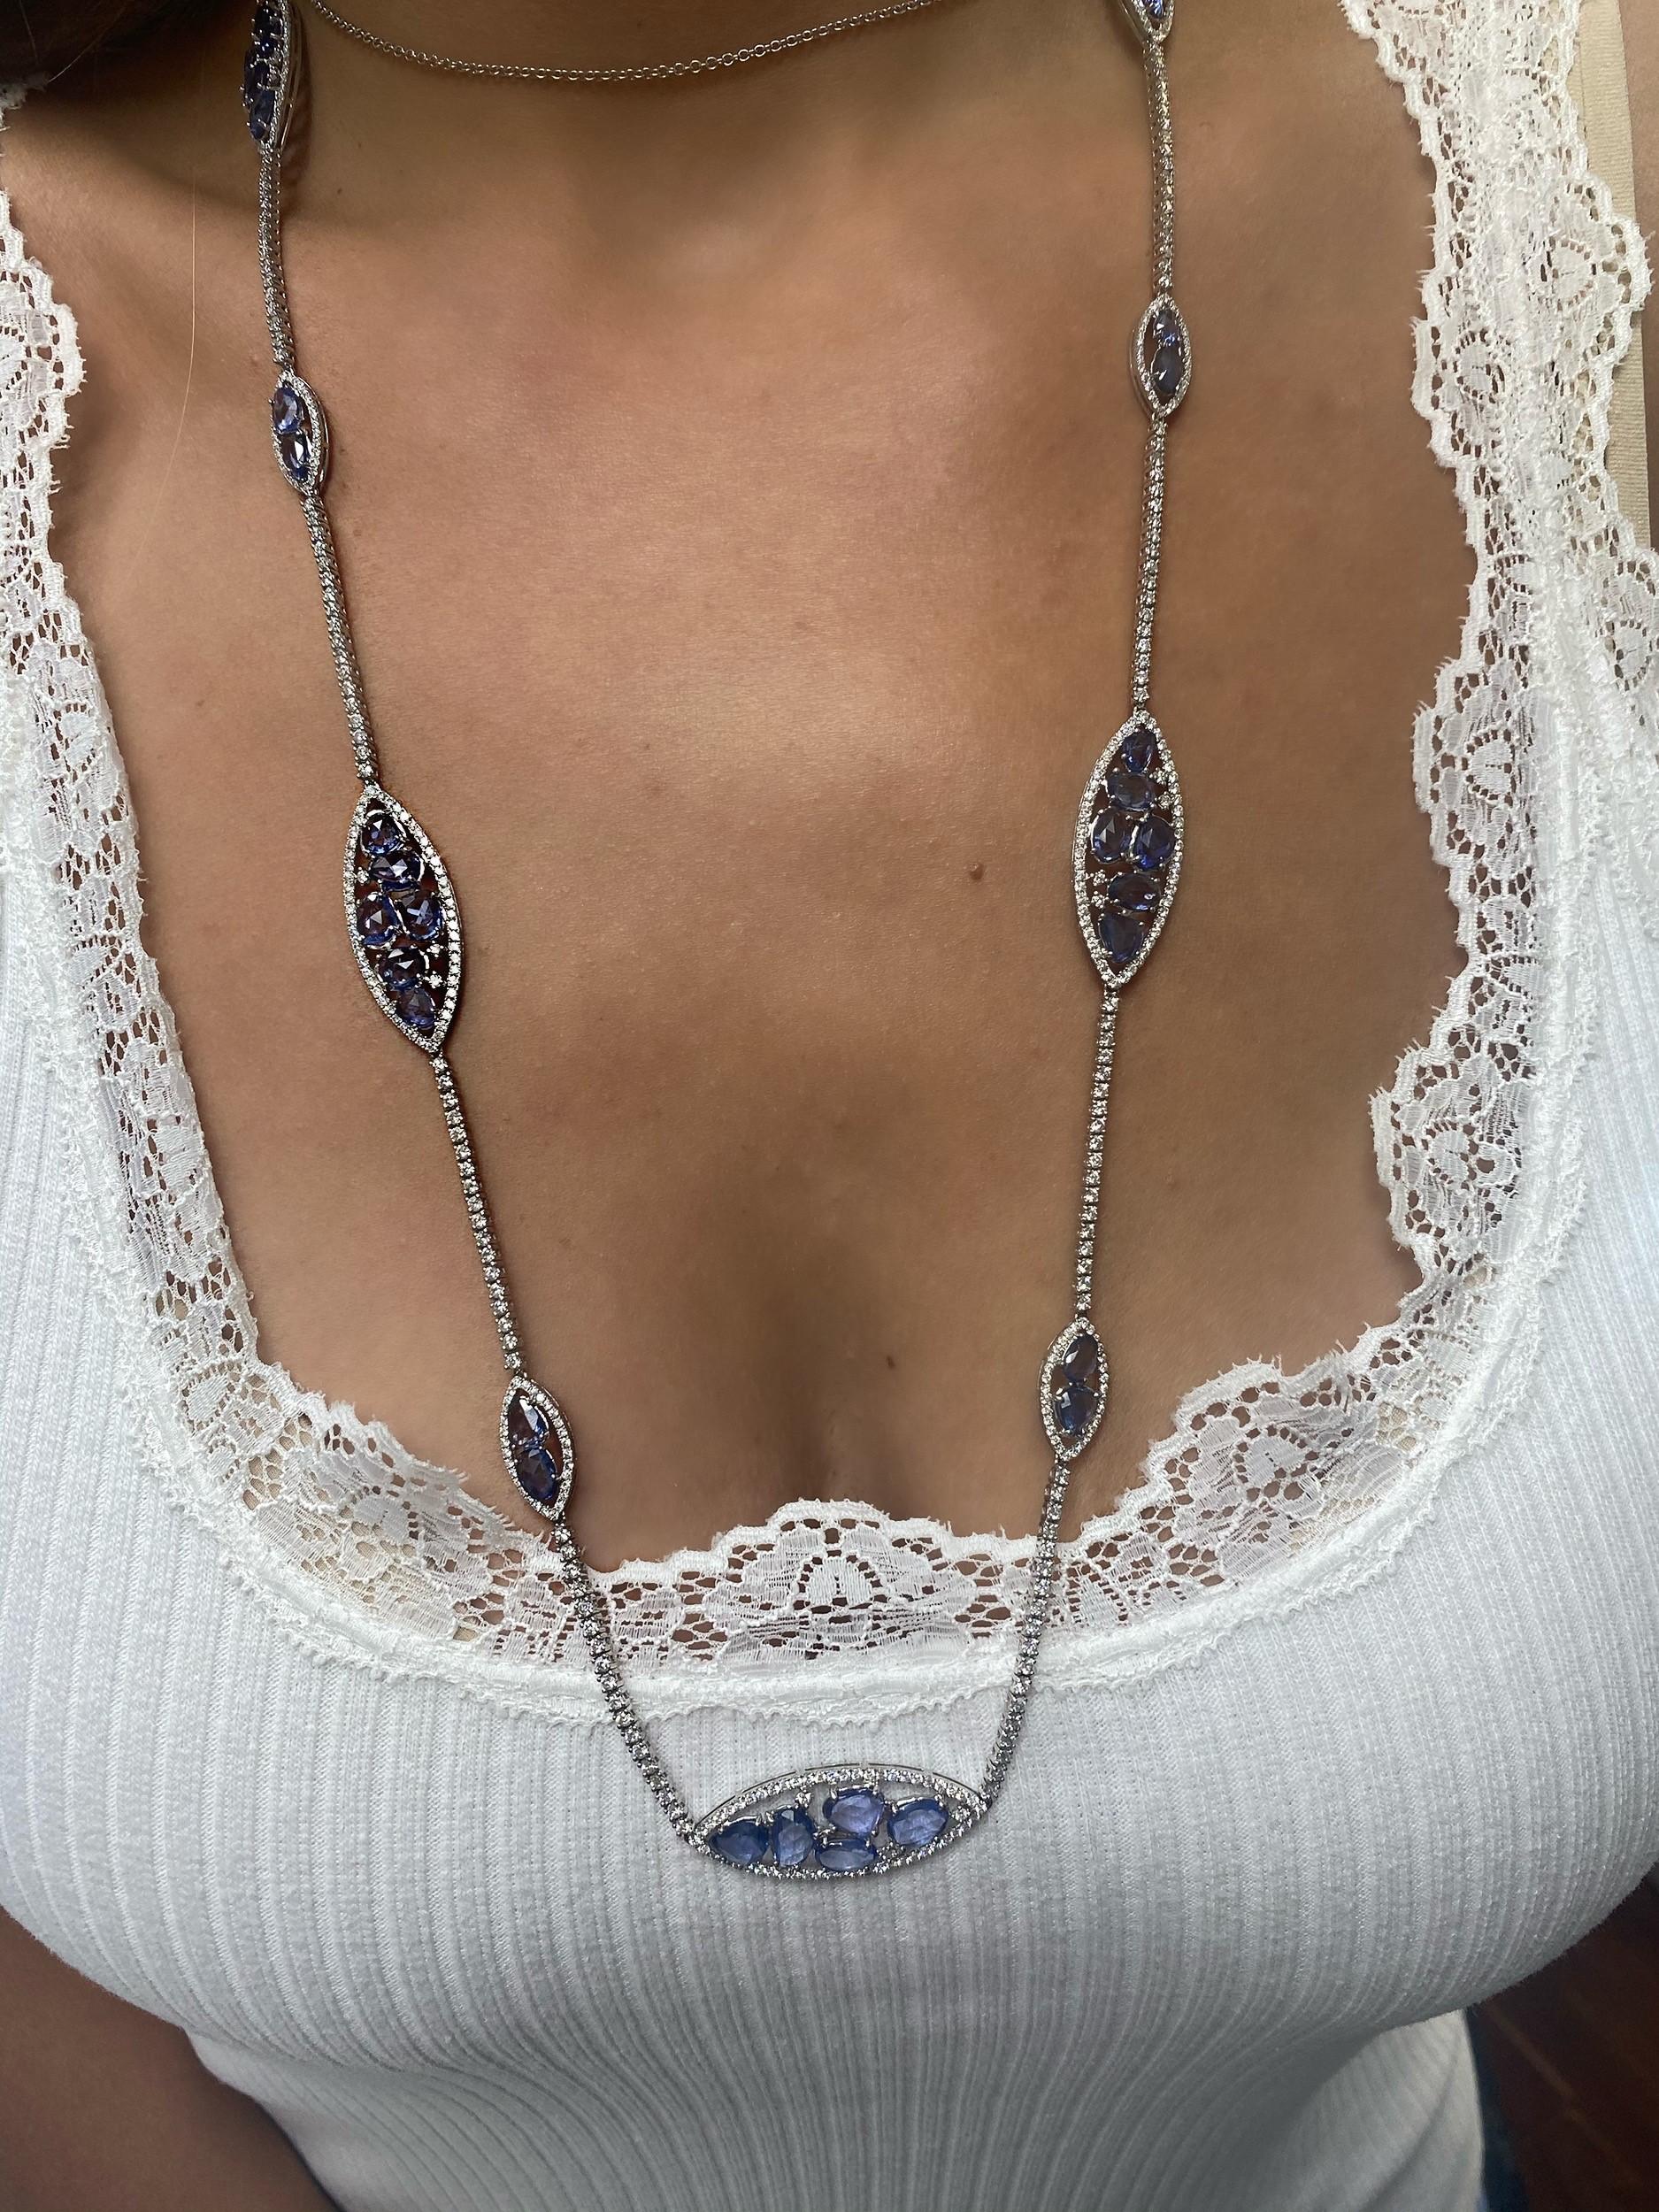 21.84 Carat Blue Sapphire and 9.27 Carat Diamond Opera Necklace In New Condition For Sale In New York, NY